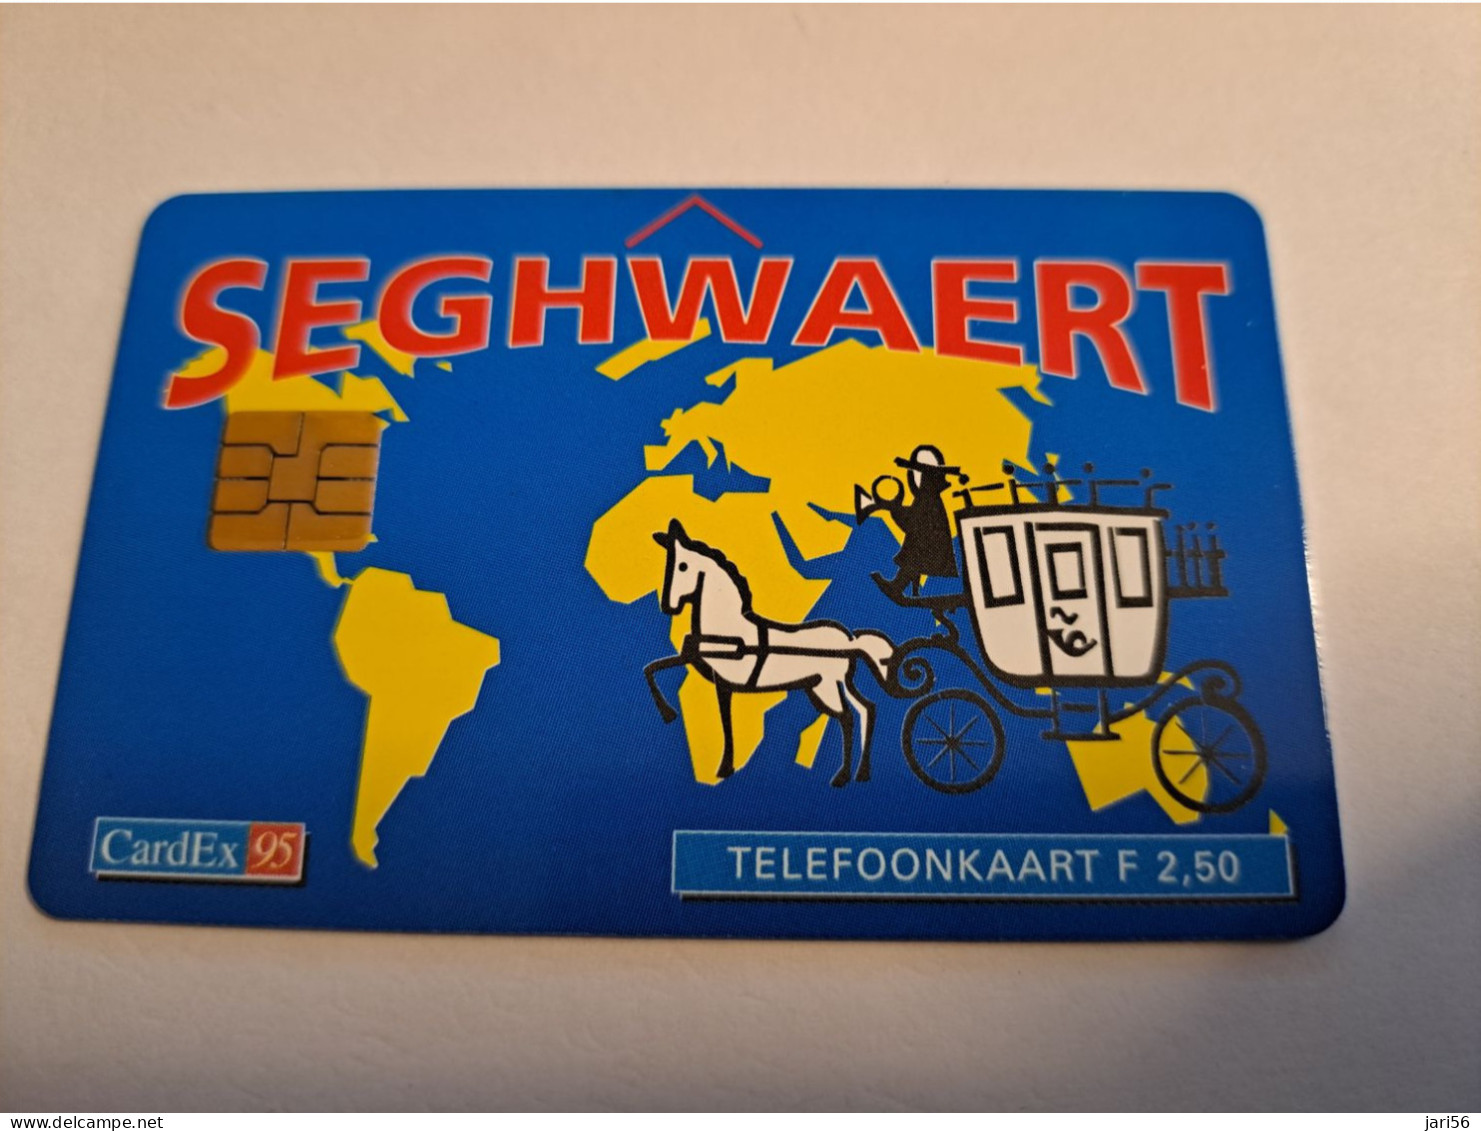 NETHERLANDS / FL 2,50- CHIP CARD / CRD 140 / SEGHWAERT  CARDEX 95/ POSTCOUCH / ONLY 650X    / PRIVATE  MINT  ** 15933** - [3] Sim Cards, Prepaid & Refills